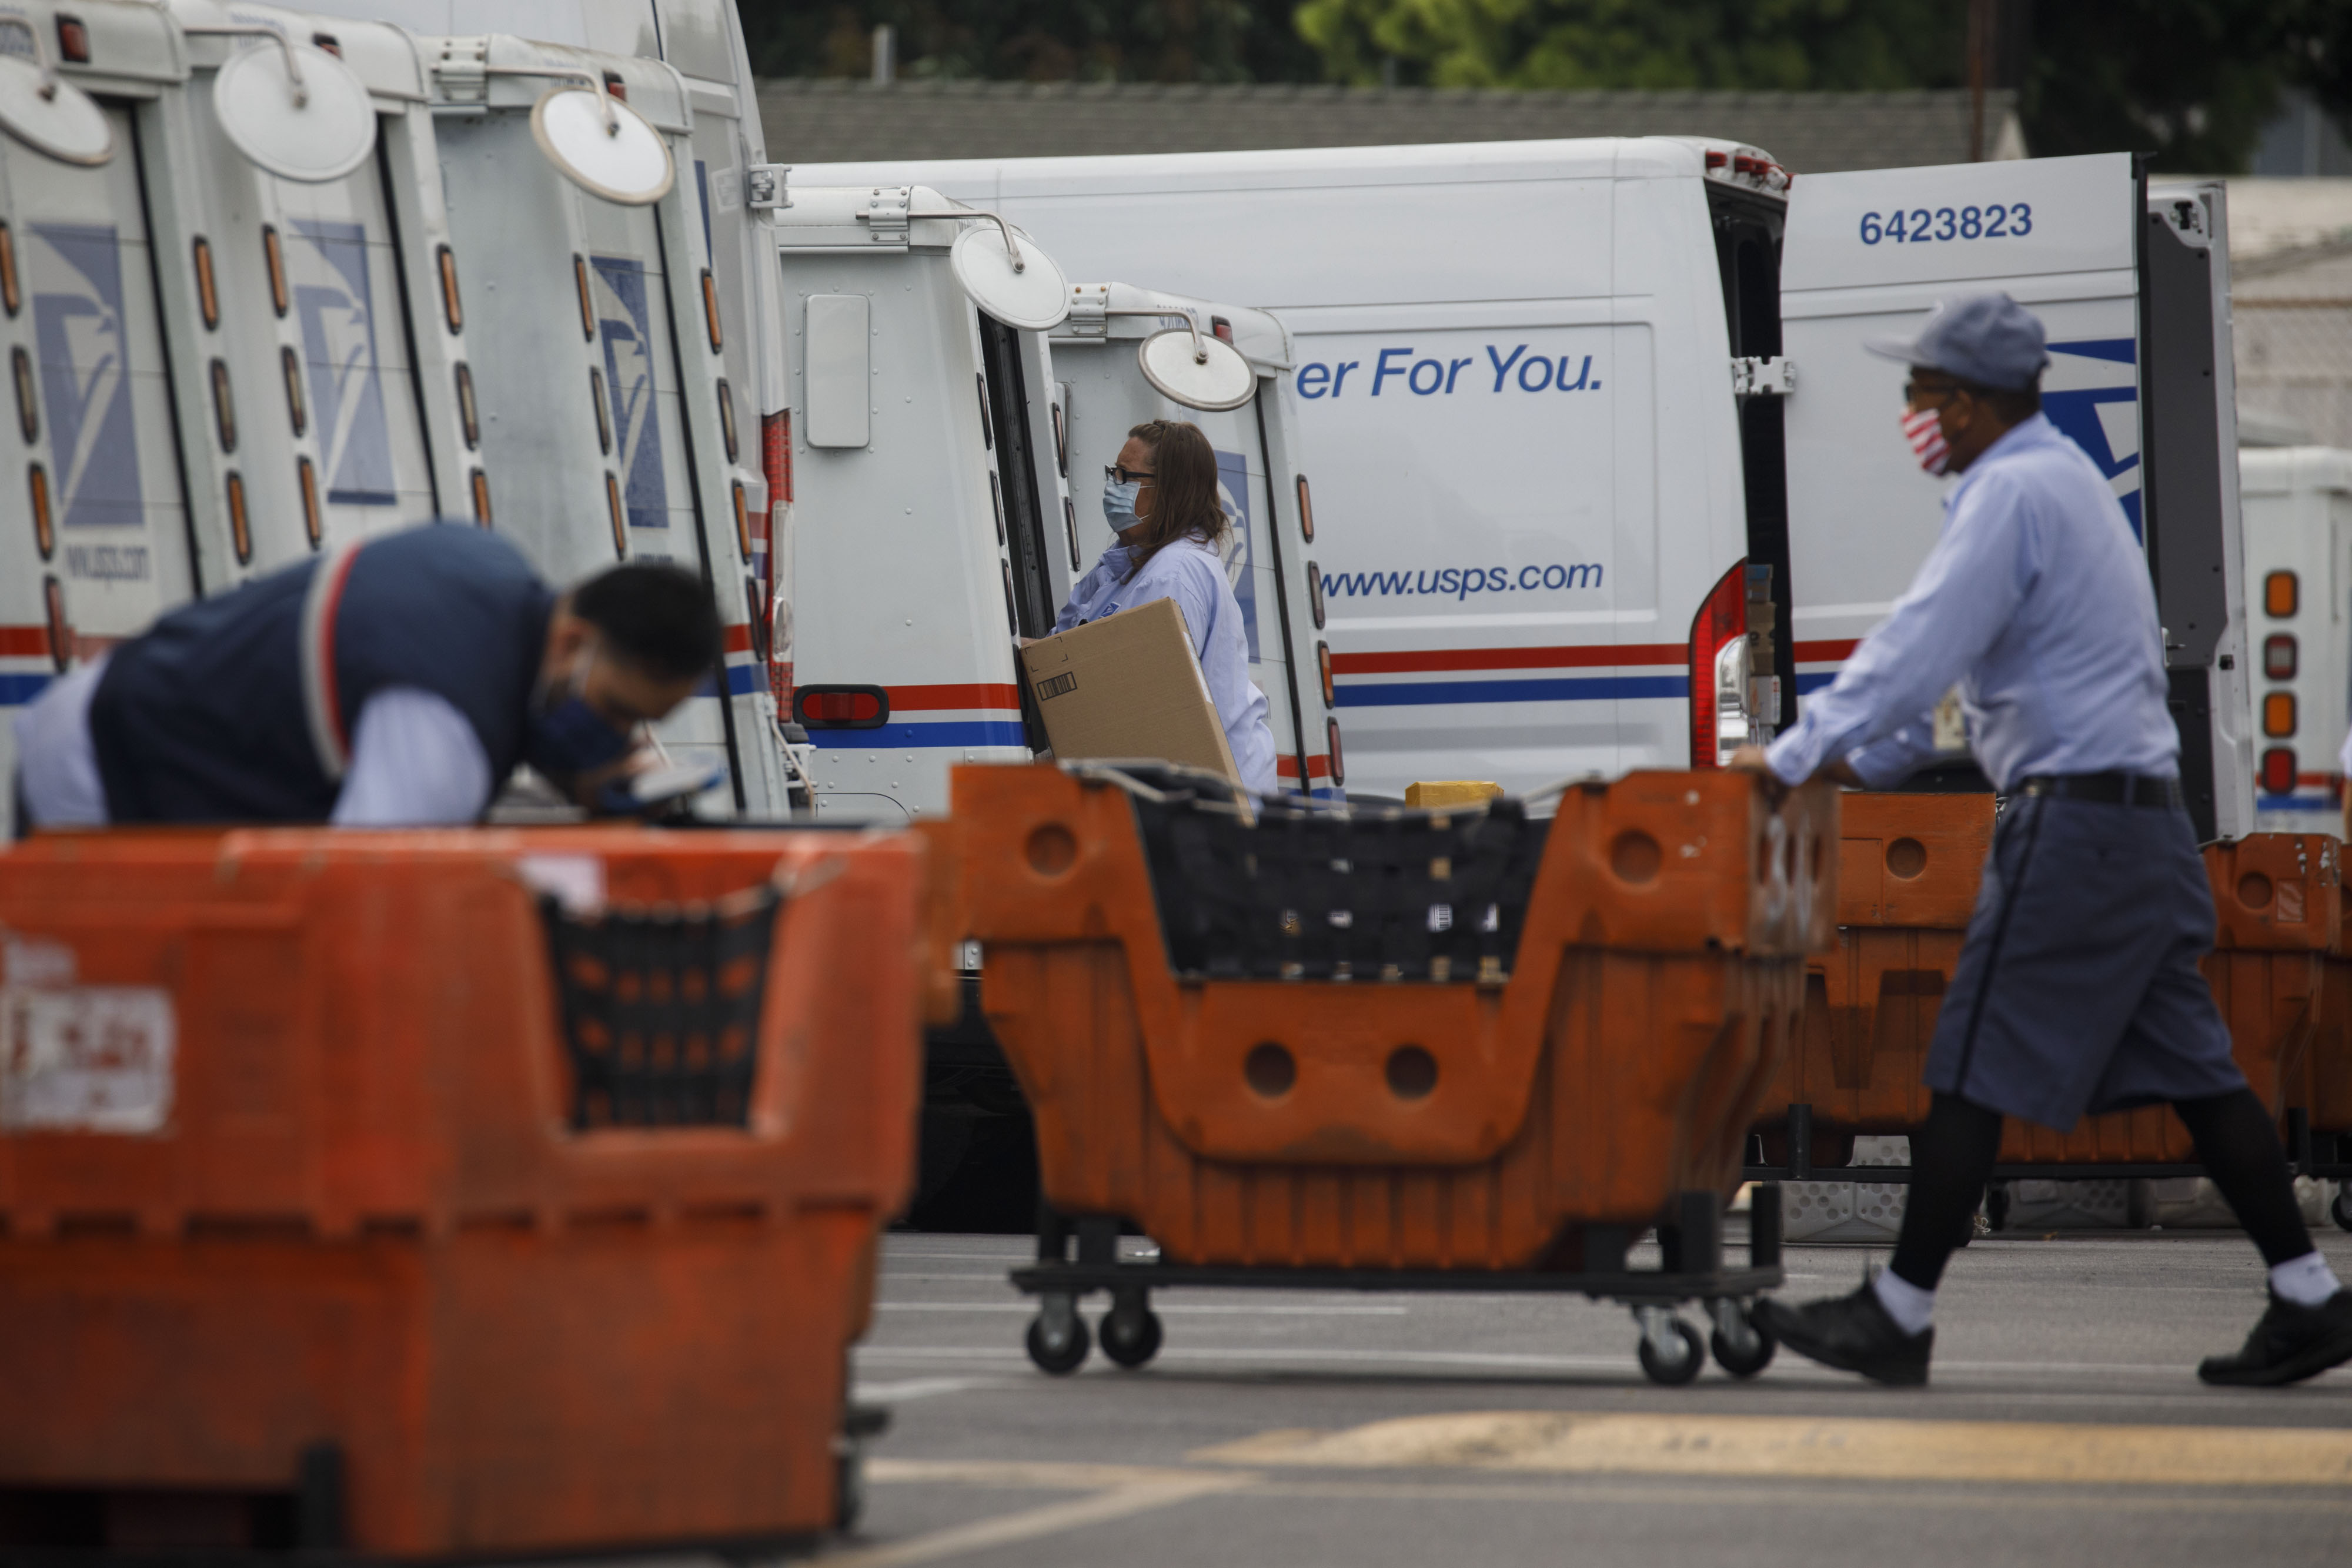 U.S. Postal Service employees load mail and packages into delivery vehicles outside a post office in Torrance, California, on Aug. 17.